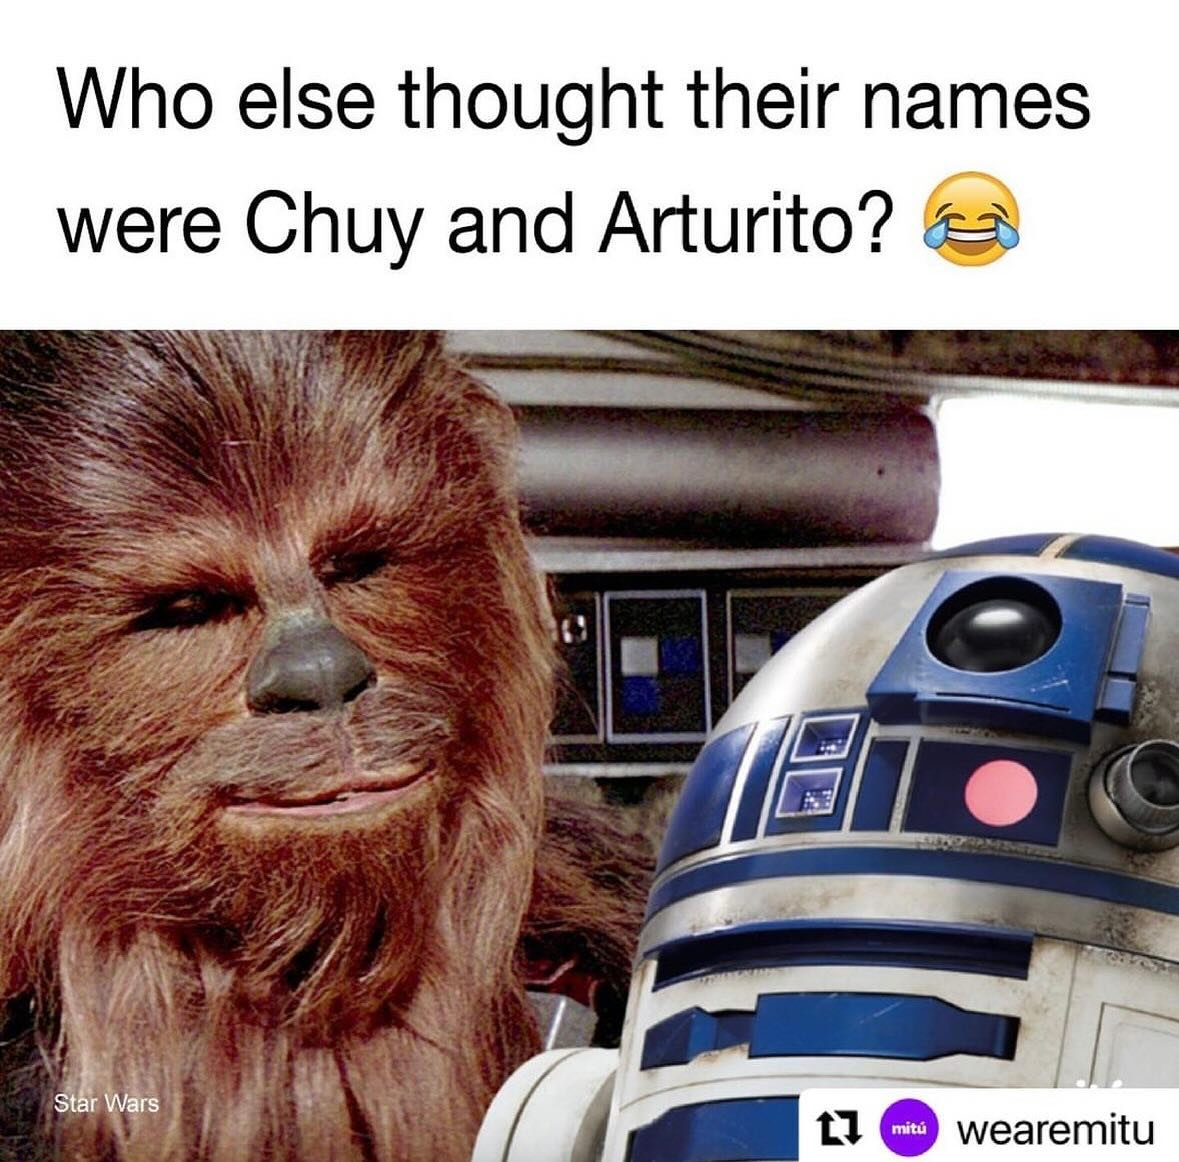 From one Chuy to another...

May the 4th (CD) be with you! 

#StarWars #maythe4thbewithyou #4thcongressionaldistrict #chuy #chewbacca #TeamChuy